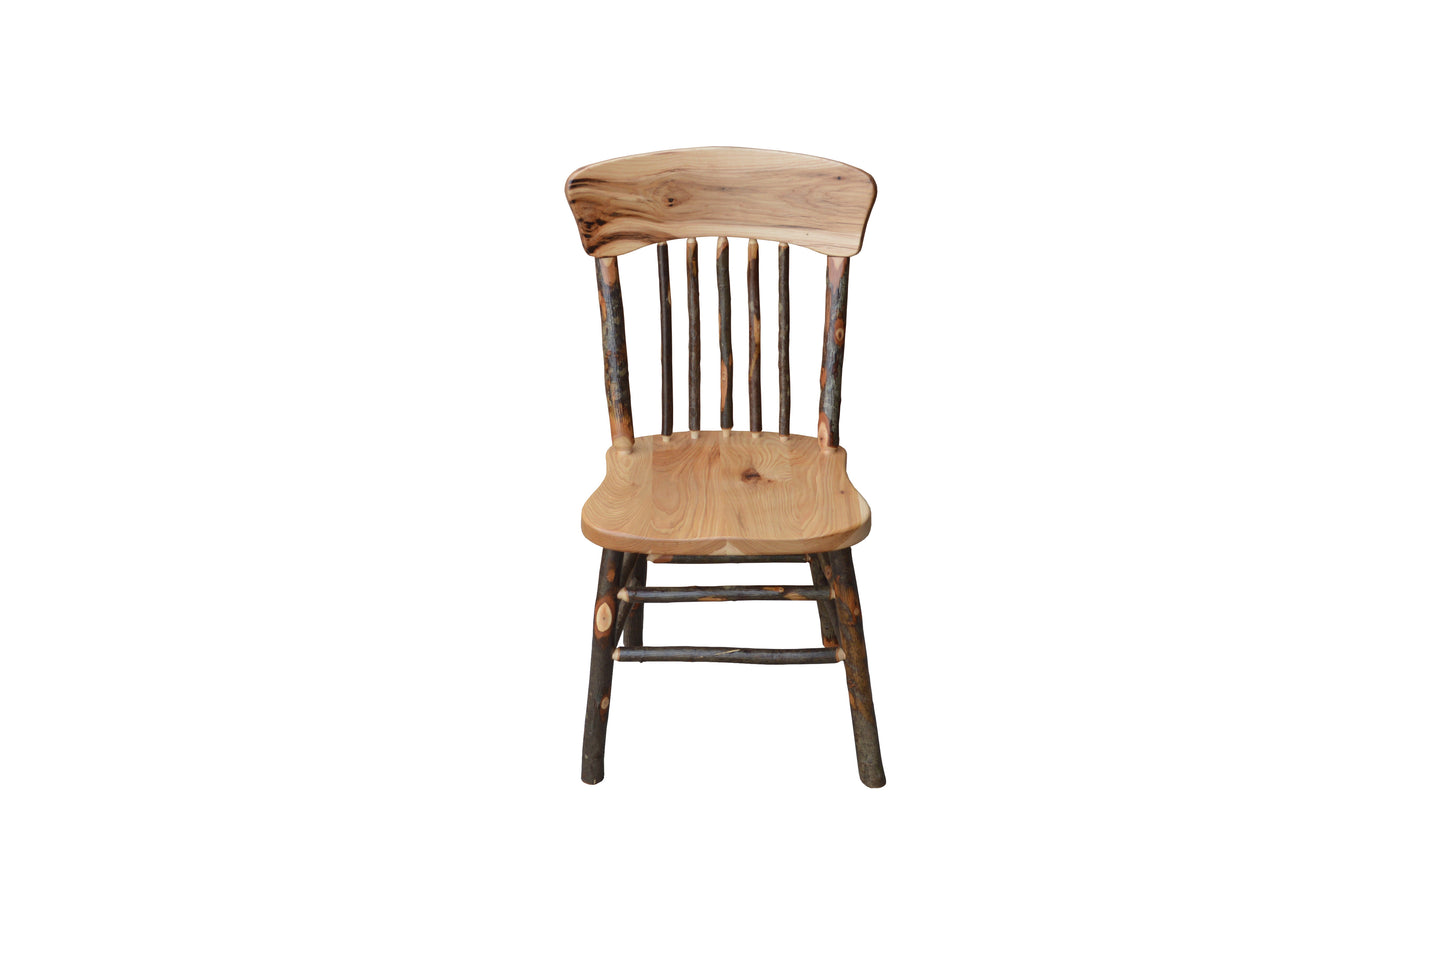 A&L Furniture Co. Amish Hickory Panel Back Dining Chair - LEAD TIME TO SHIP 4 WEEKS OR LESS